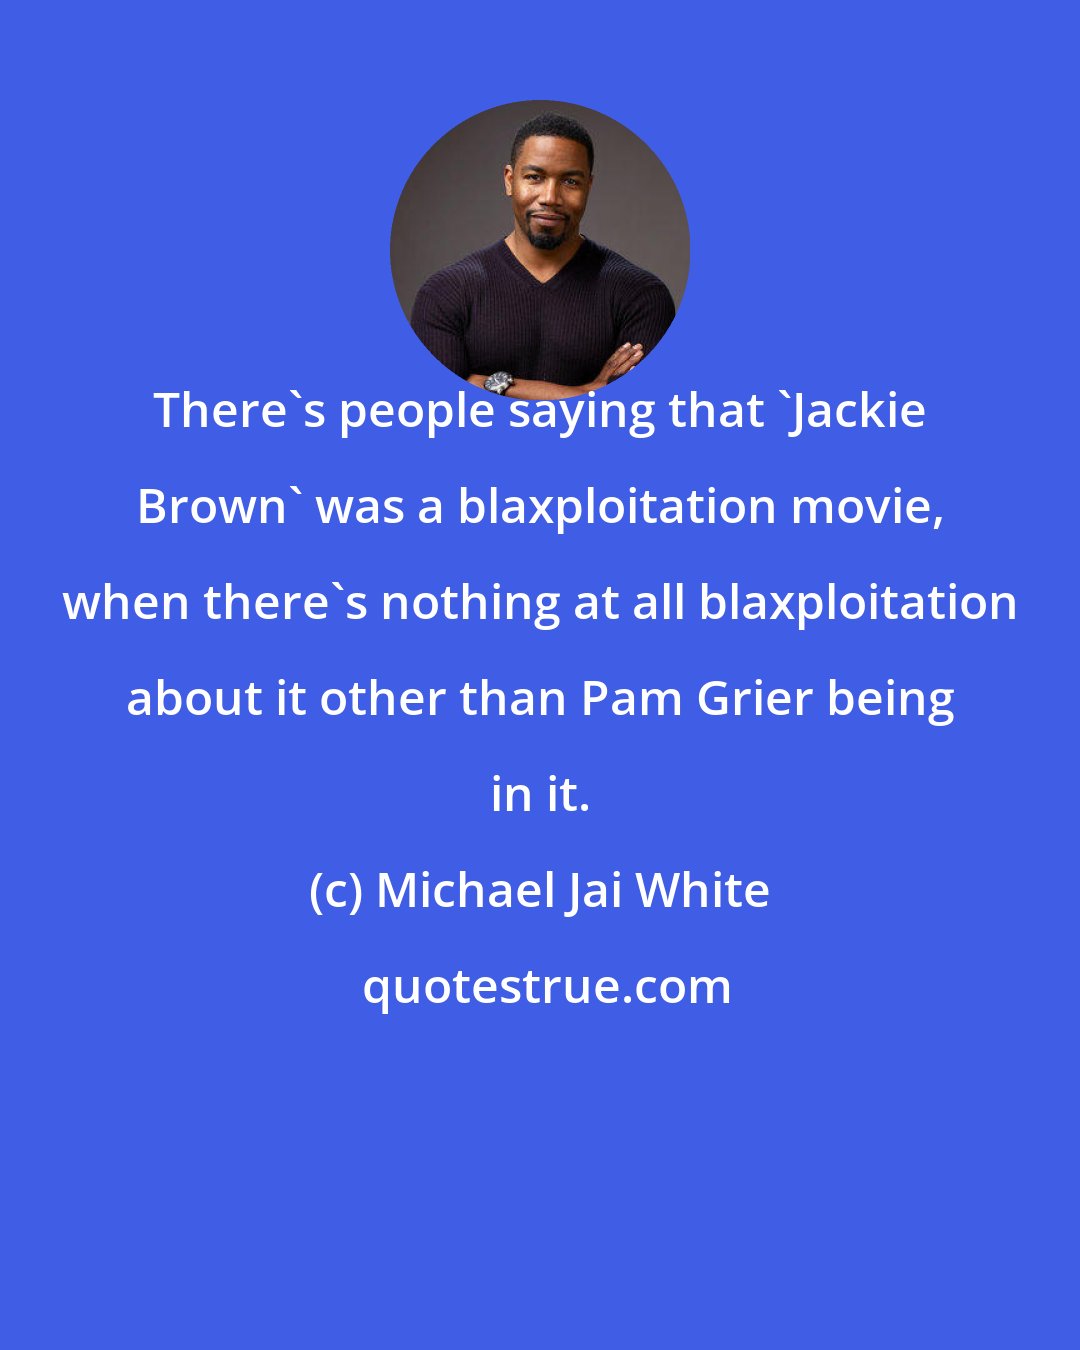 Michael Jai White: There's people saying that 'Jackie Brown' was a blaxploitation movie, when there's nothing at all blaxploitation about it other than Pam Grier being in it.